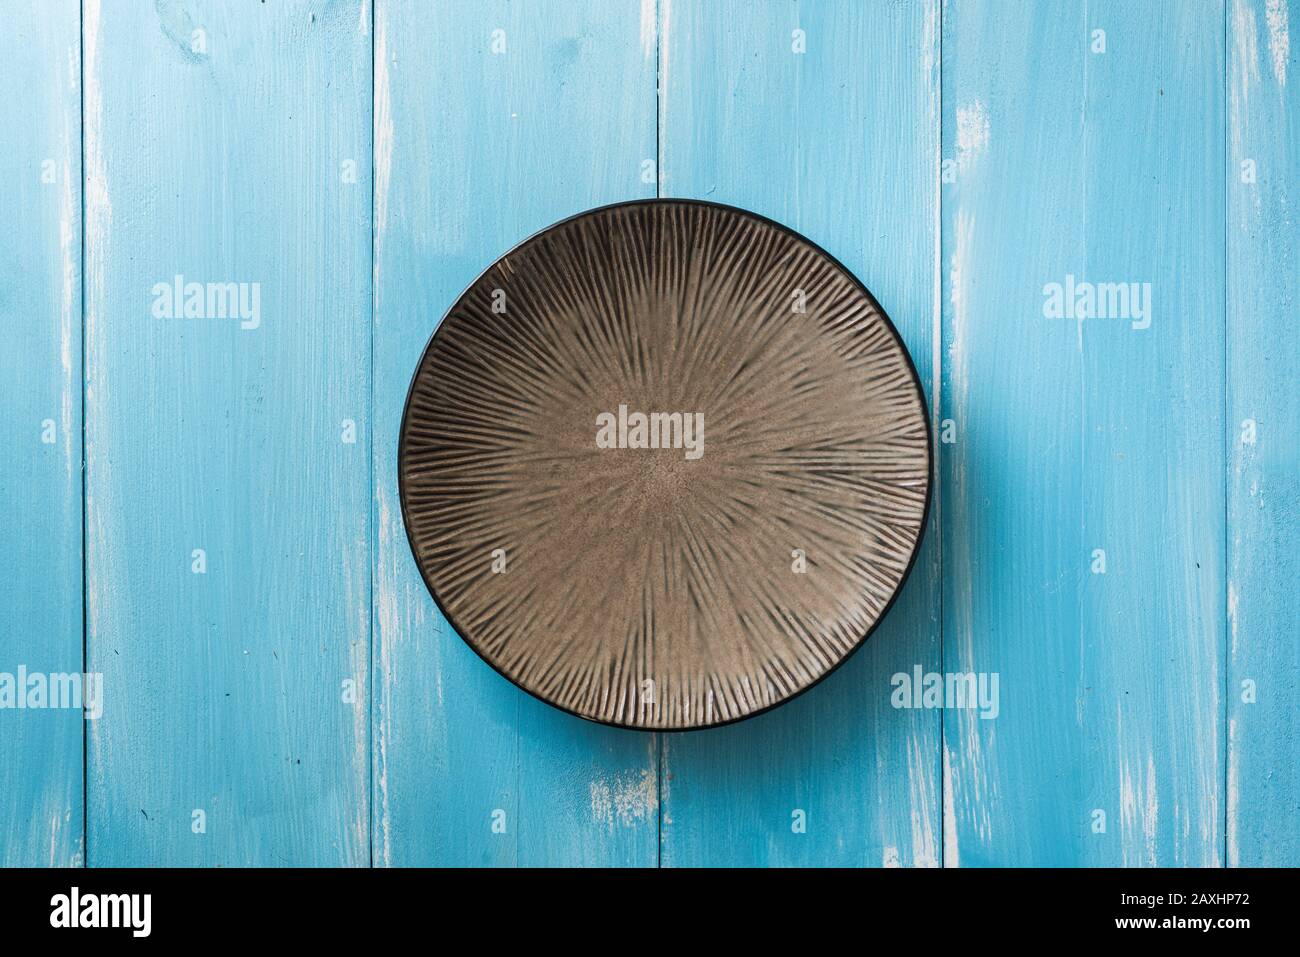 Round Plate on blue wooden table background Stock Photo